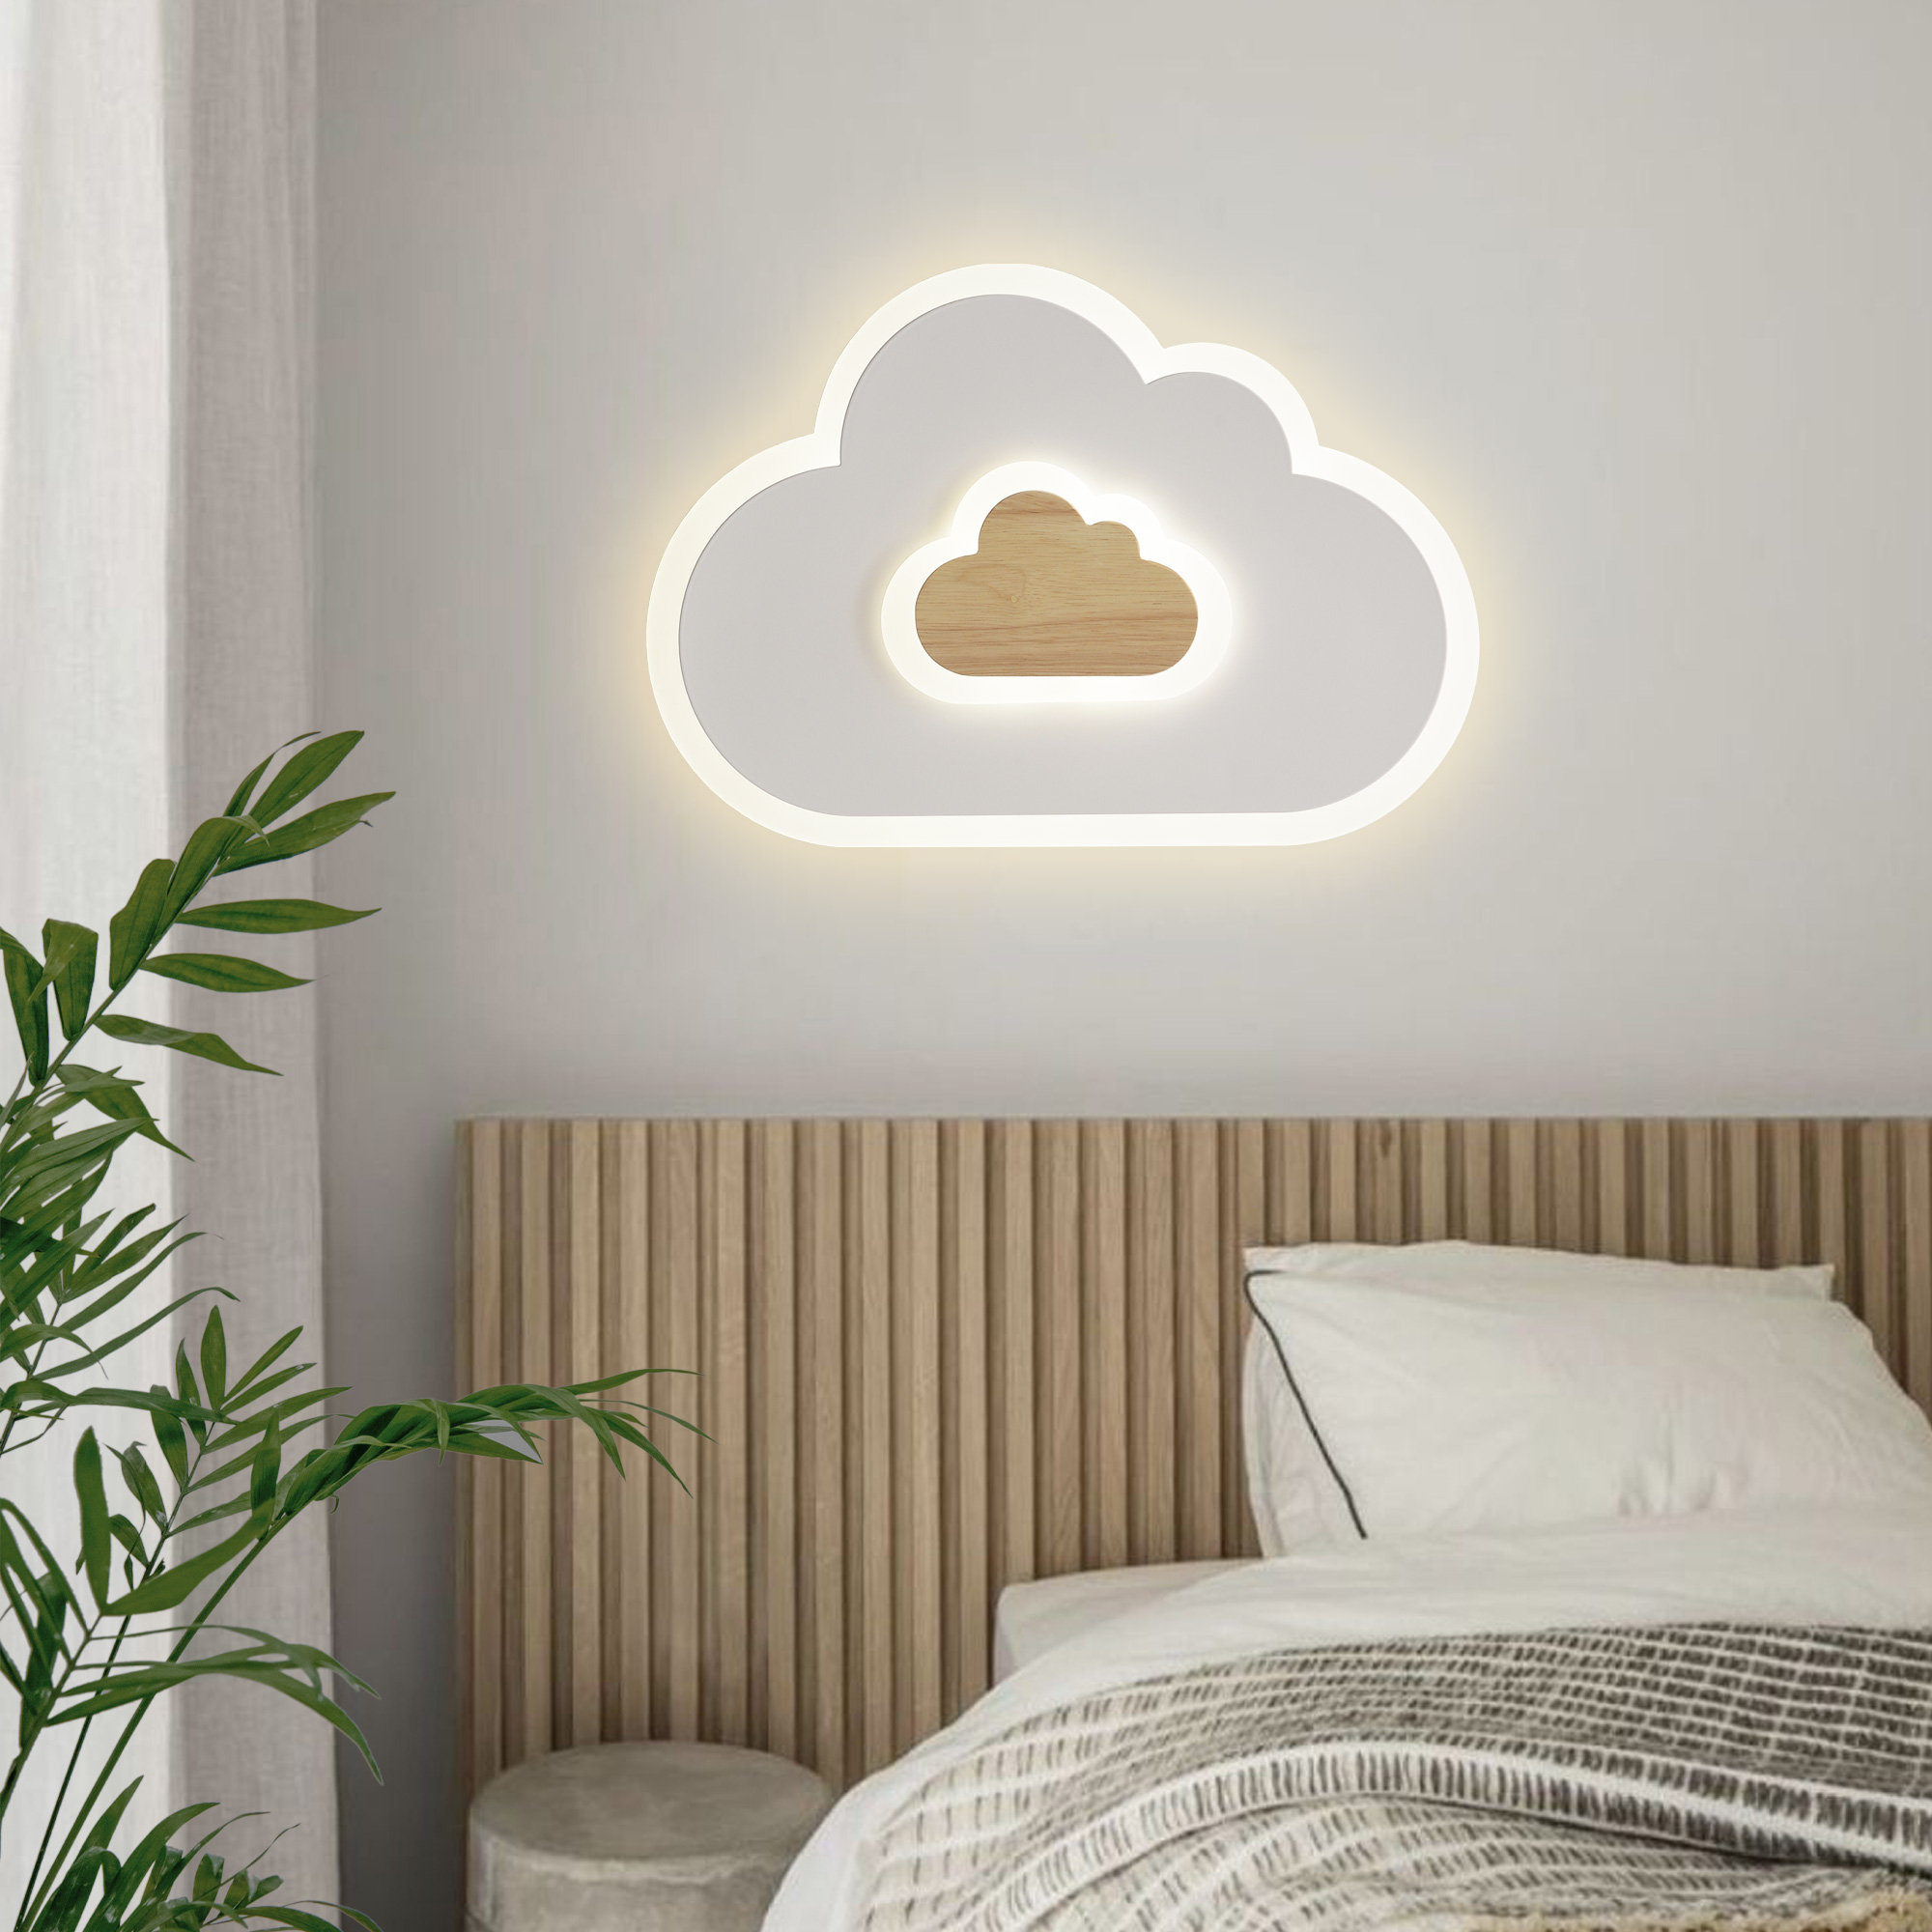 Decorative LED Ceiling Ceiling Lamp For Kids Room Perfect For Salon And  Indoor Lighting From Lvlingfang_1882020, $206.34